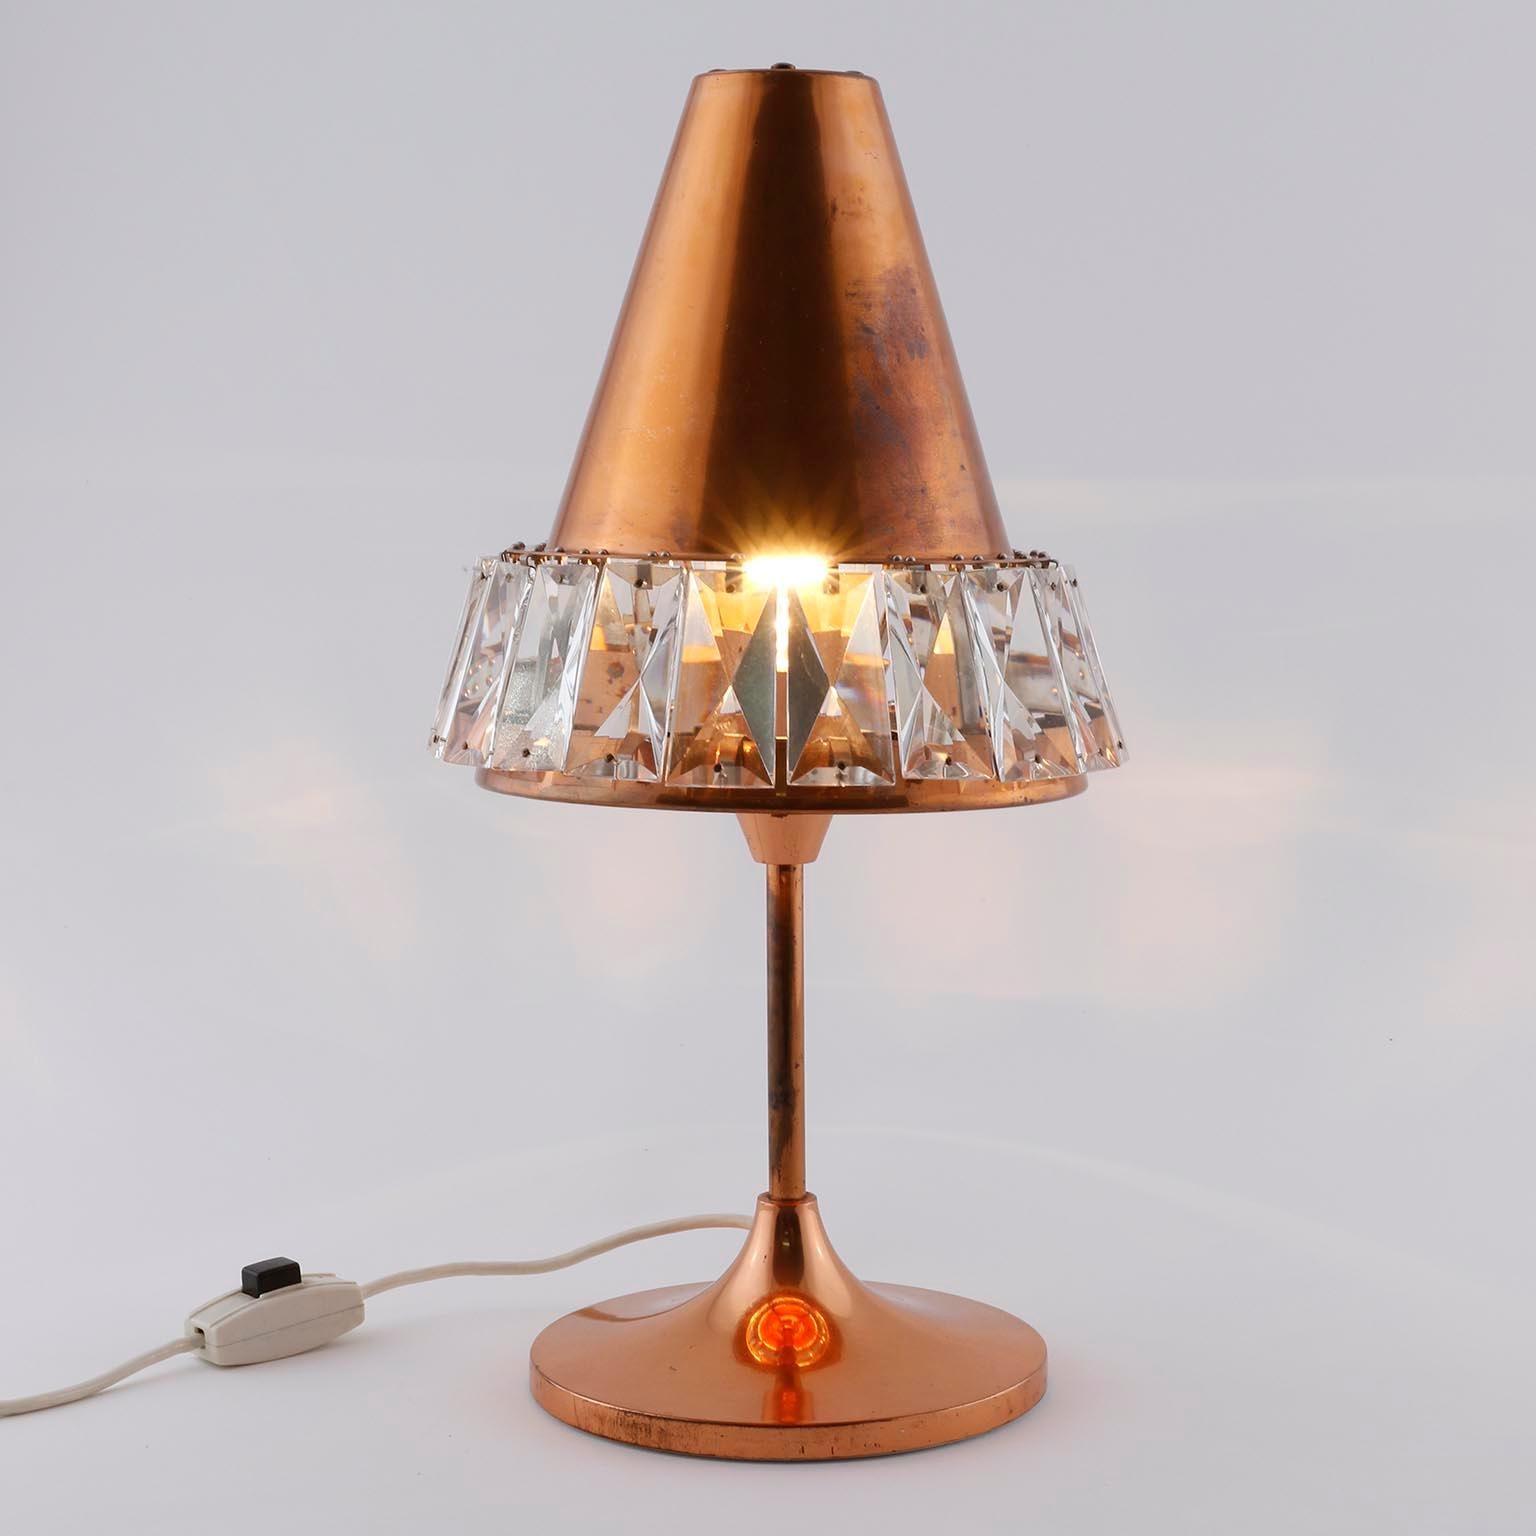 Bakalowits Table Lamp, Patinated Copper Nickel Crystal Glass, Austria, 1960s For Sale 2